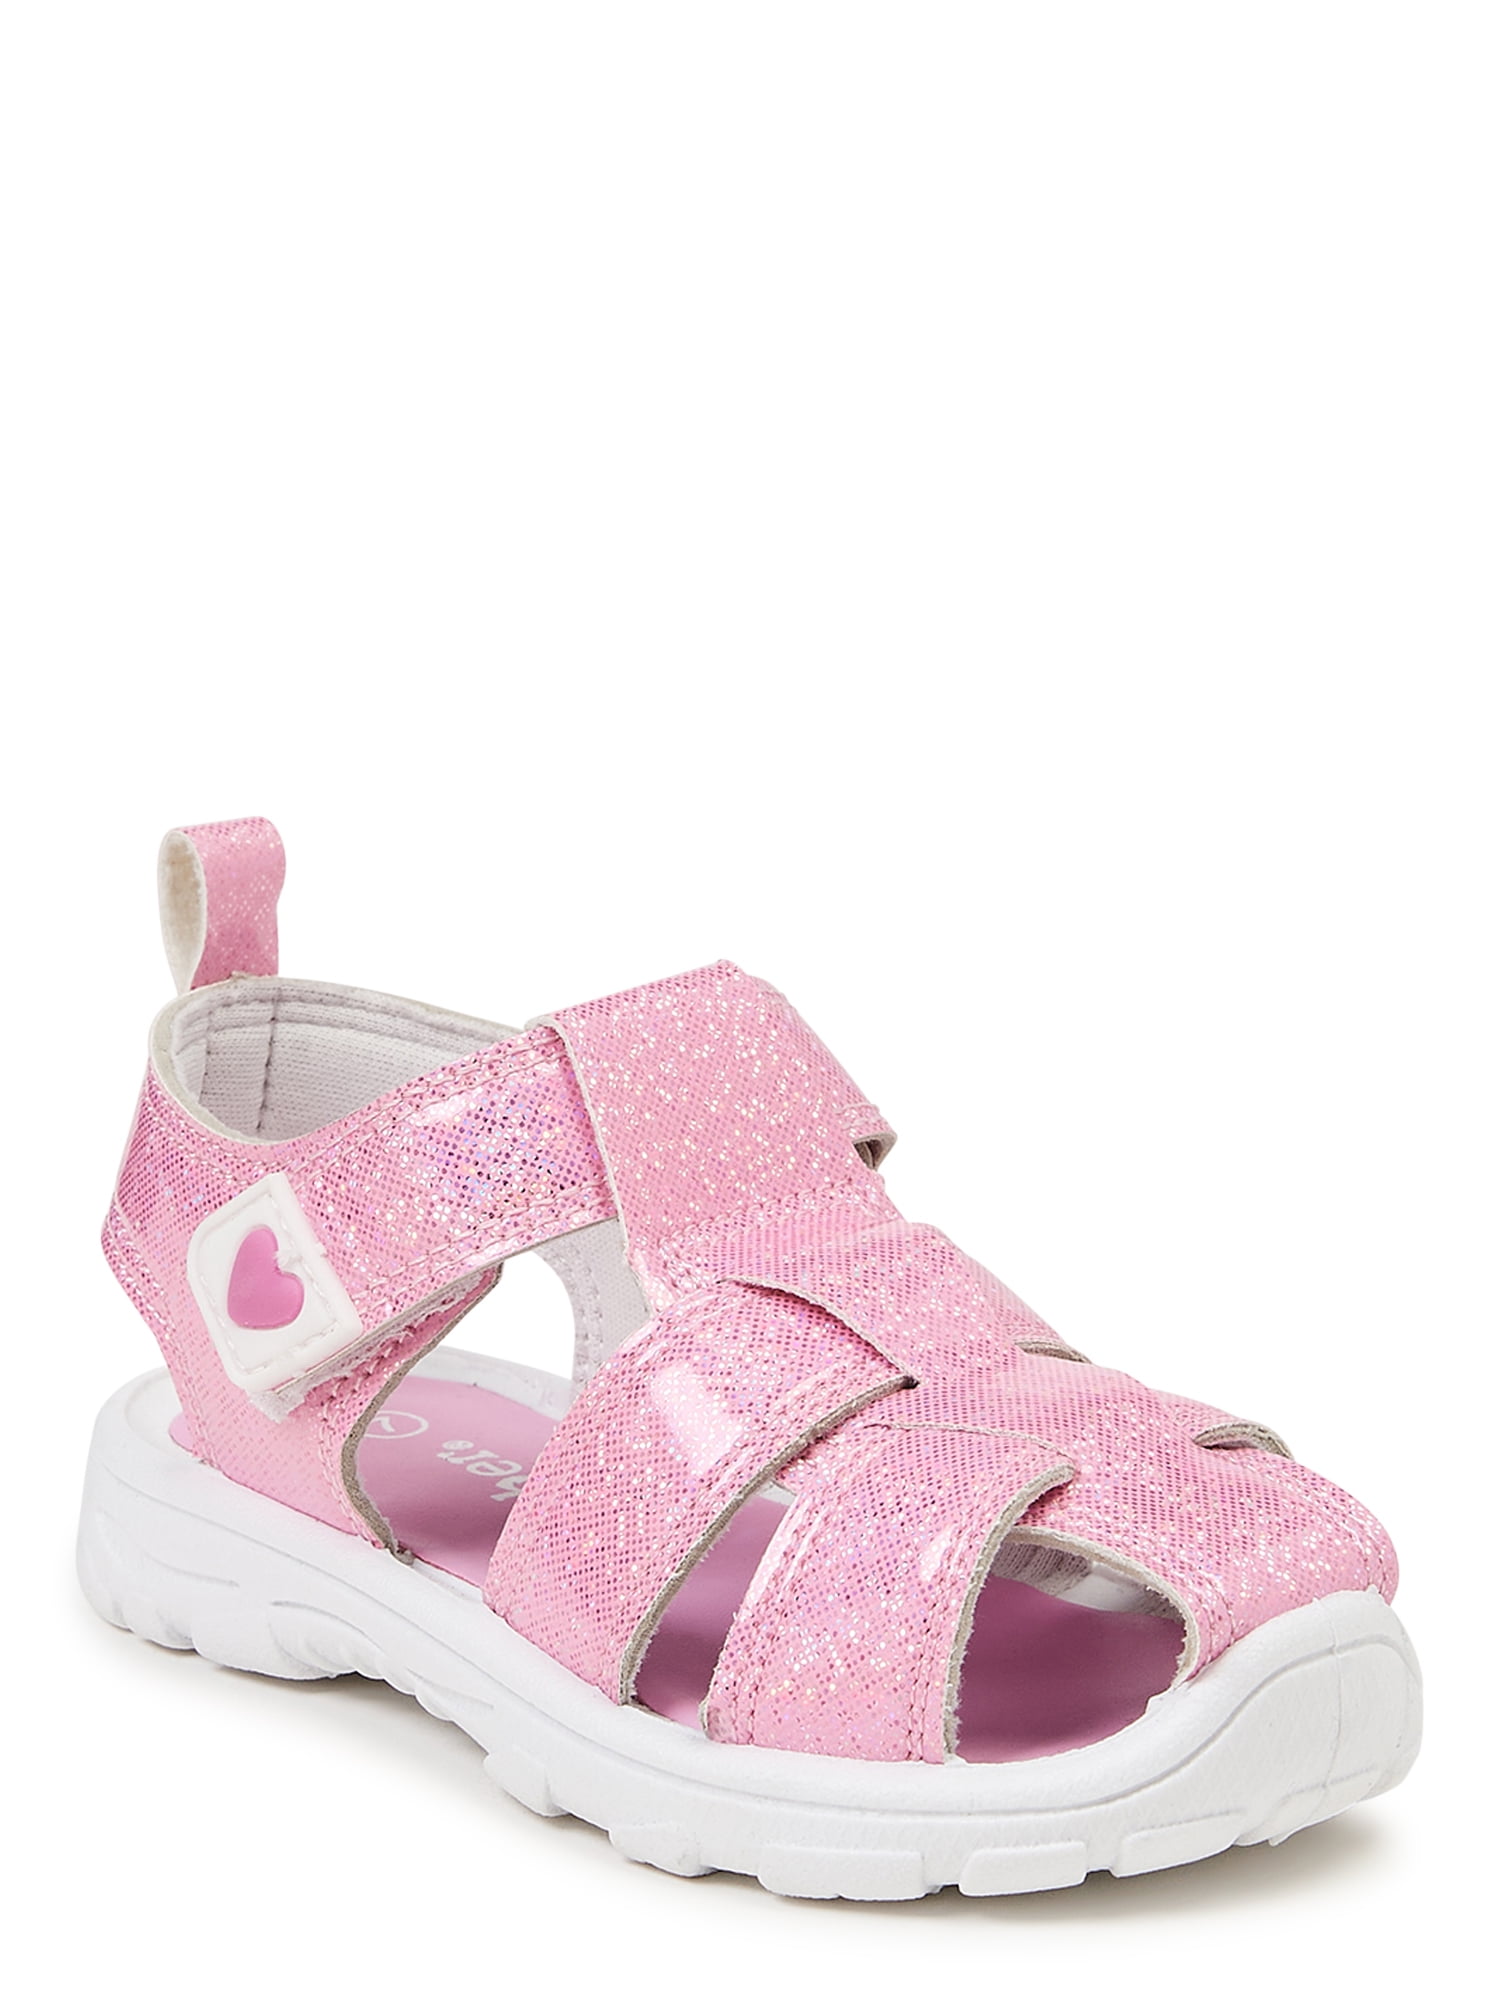 Kids Size 3 4 5 6 7 Childs White Hello Kitty Cat Rubber Soft Sandal Shoes 